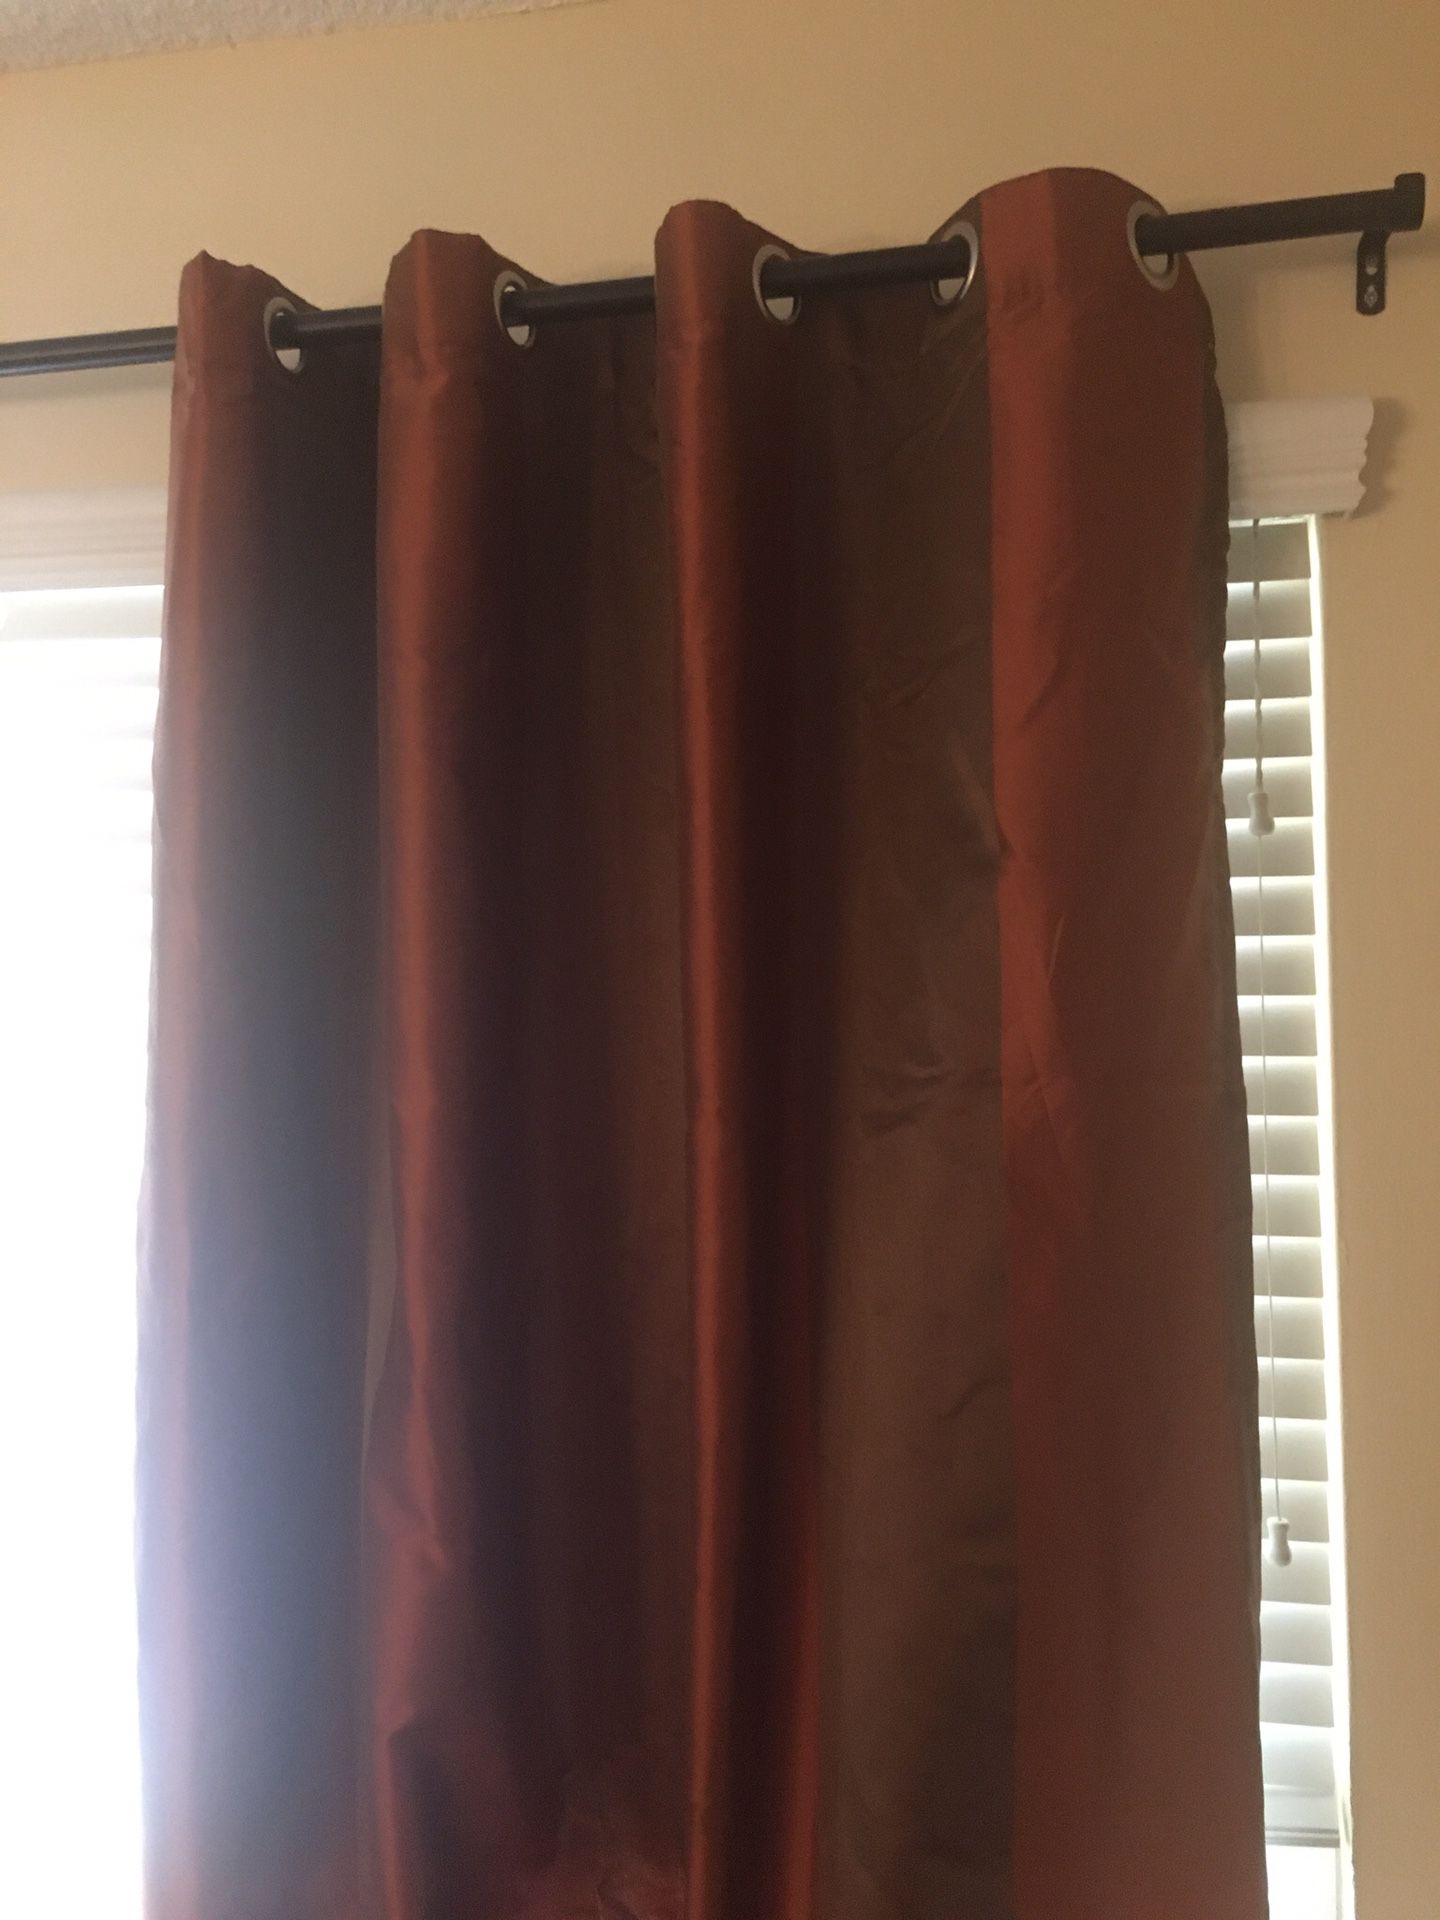 5 panels of curtains each panel $25